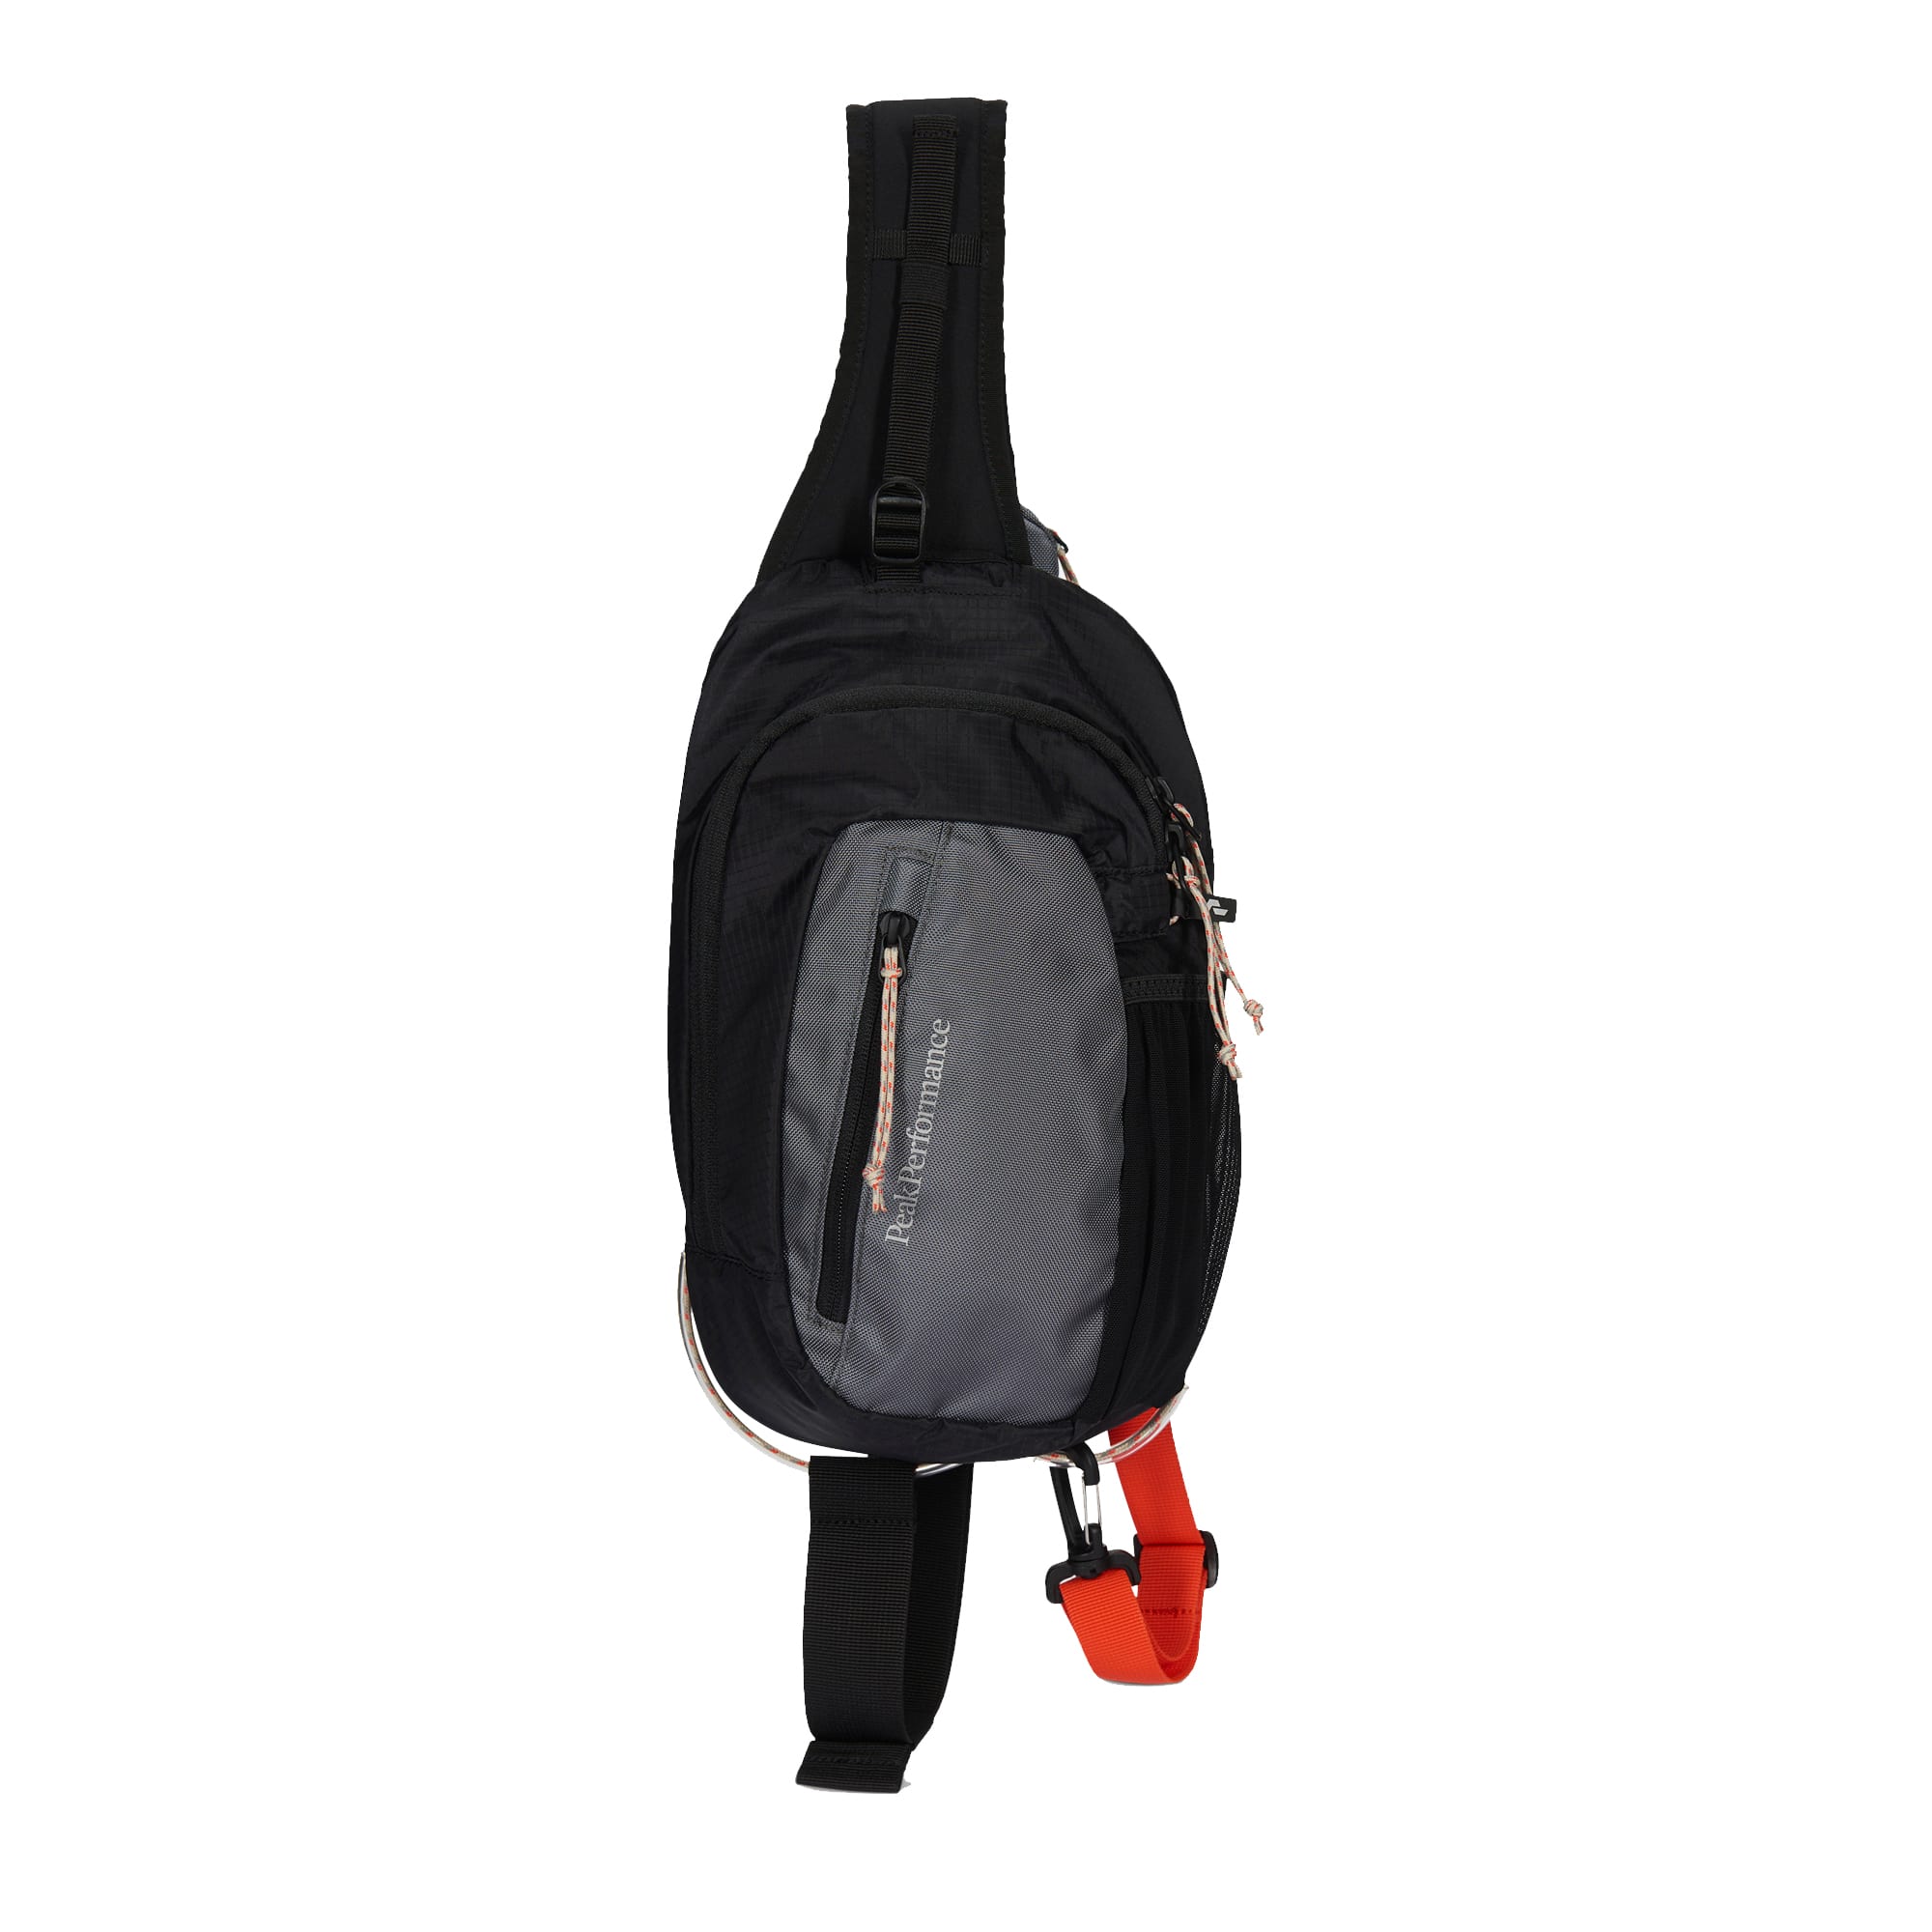 Buy Peak Performance Outdoor Sling Bag from Outnorth